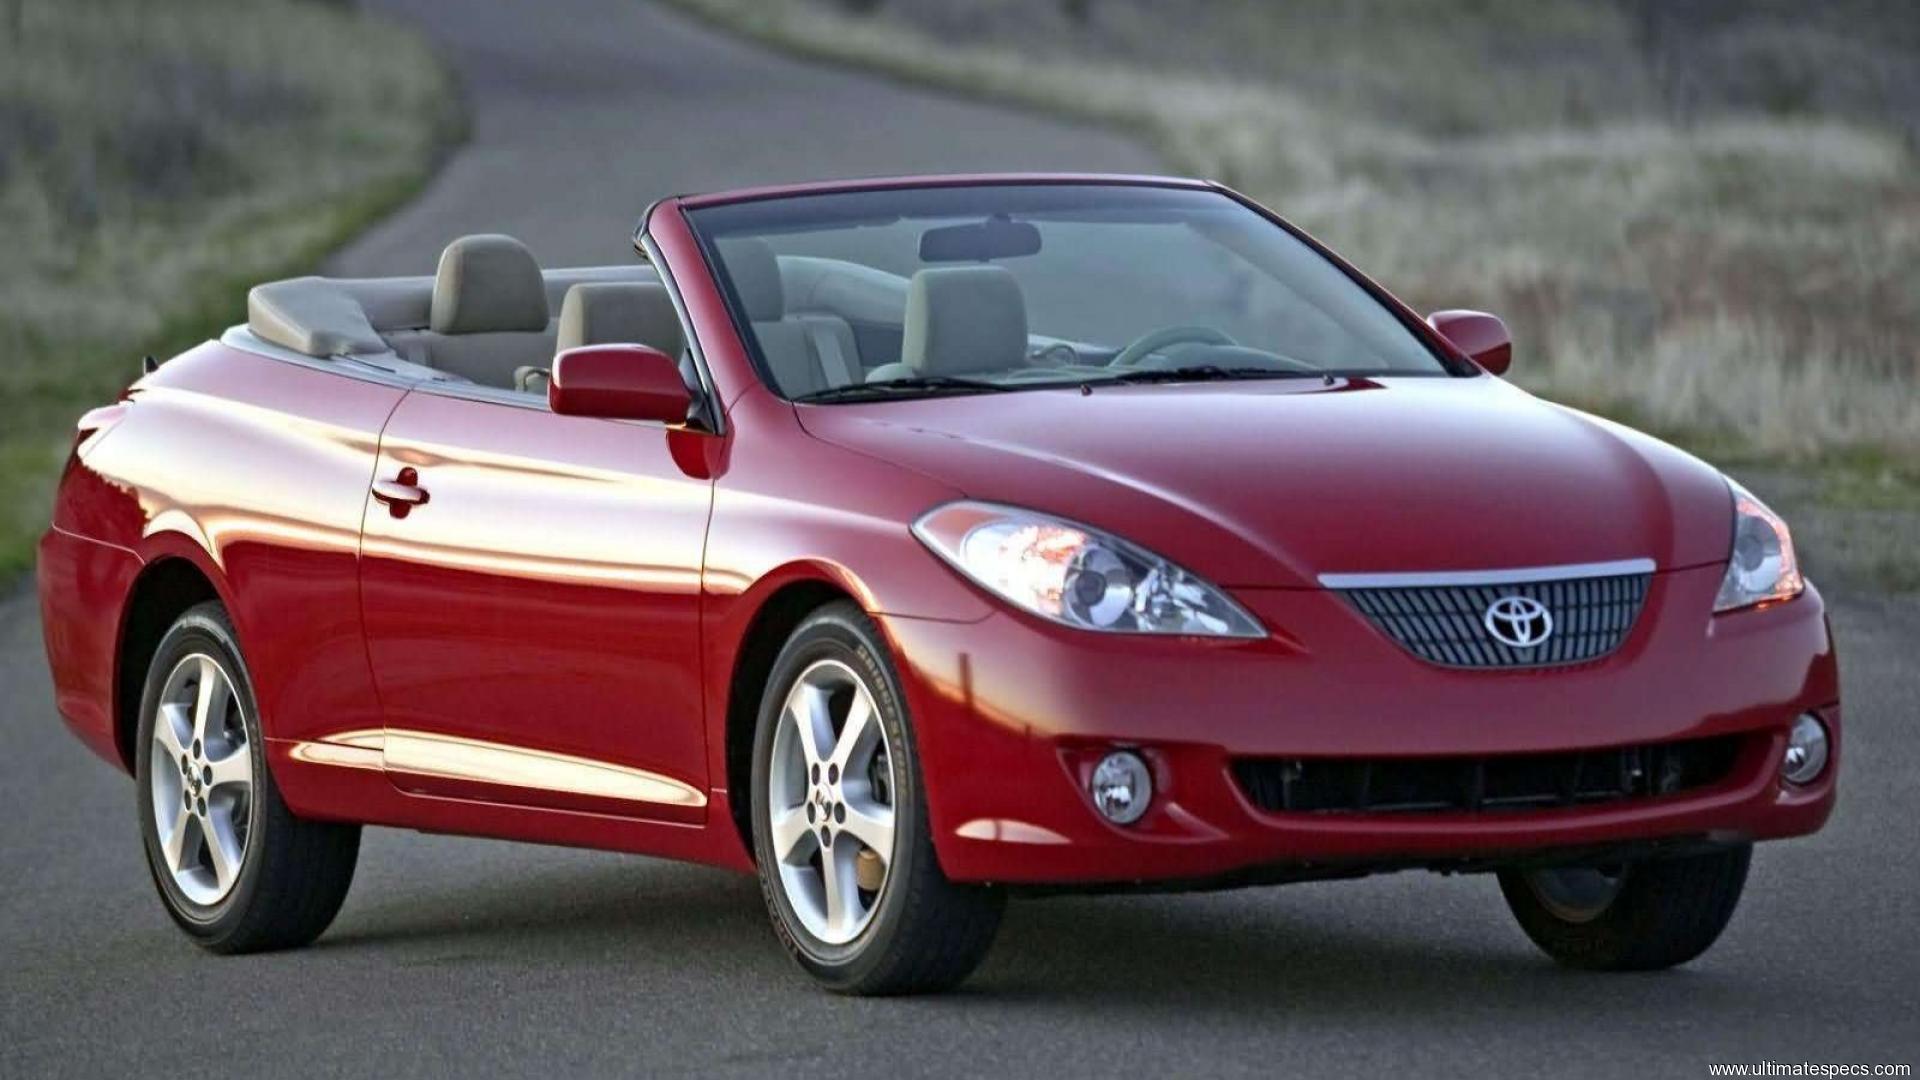 Toyota Camry Solara II Images, pictures, gallery